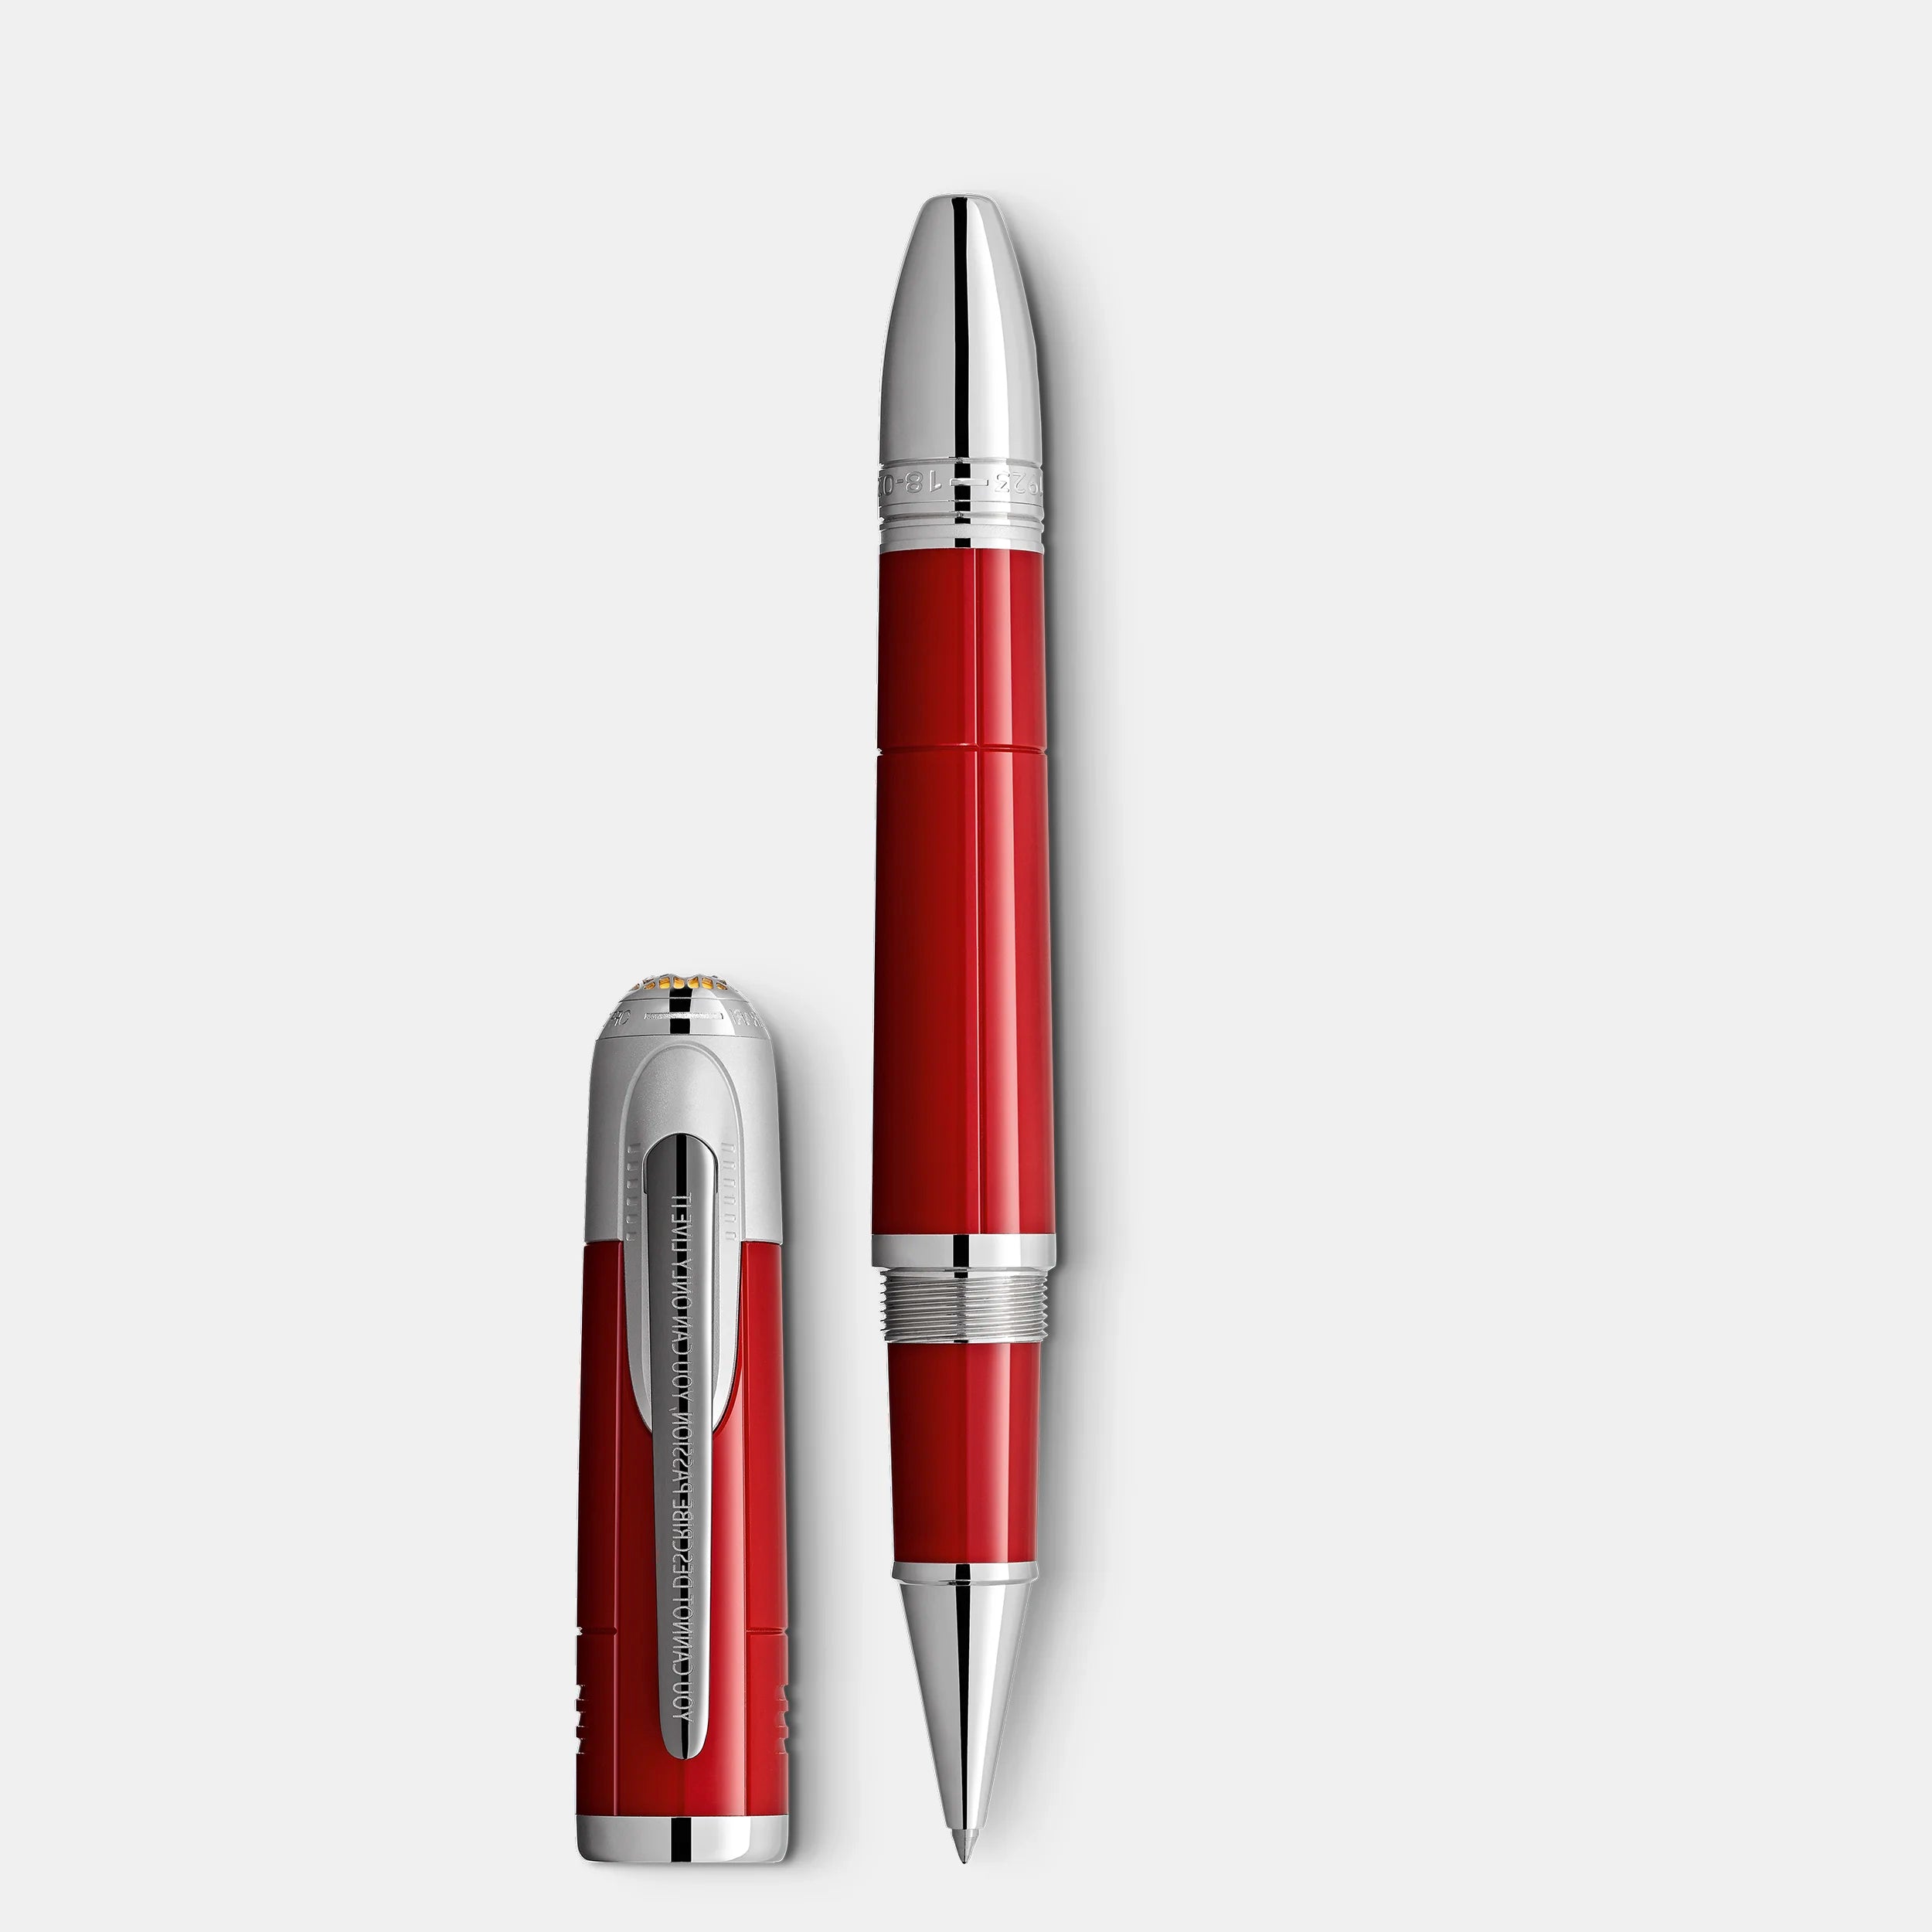 MONTBLANC | Roller Great Characters Enzo Ferrari Special Edition | MB127175